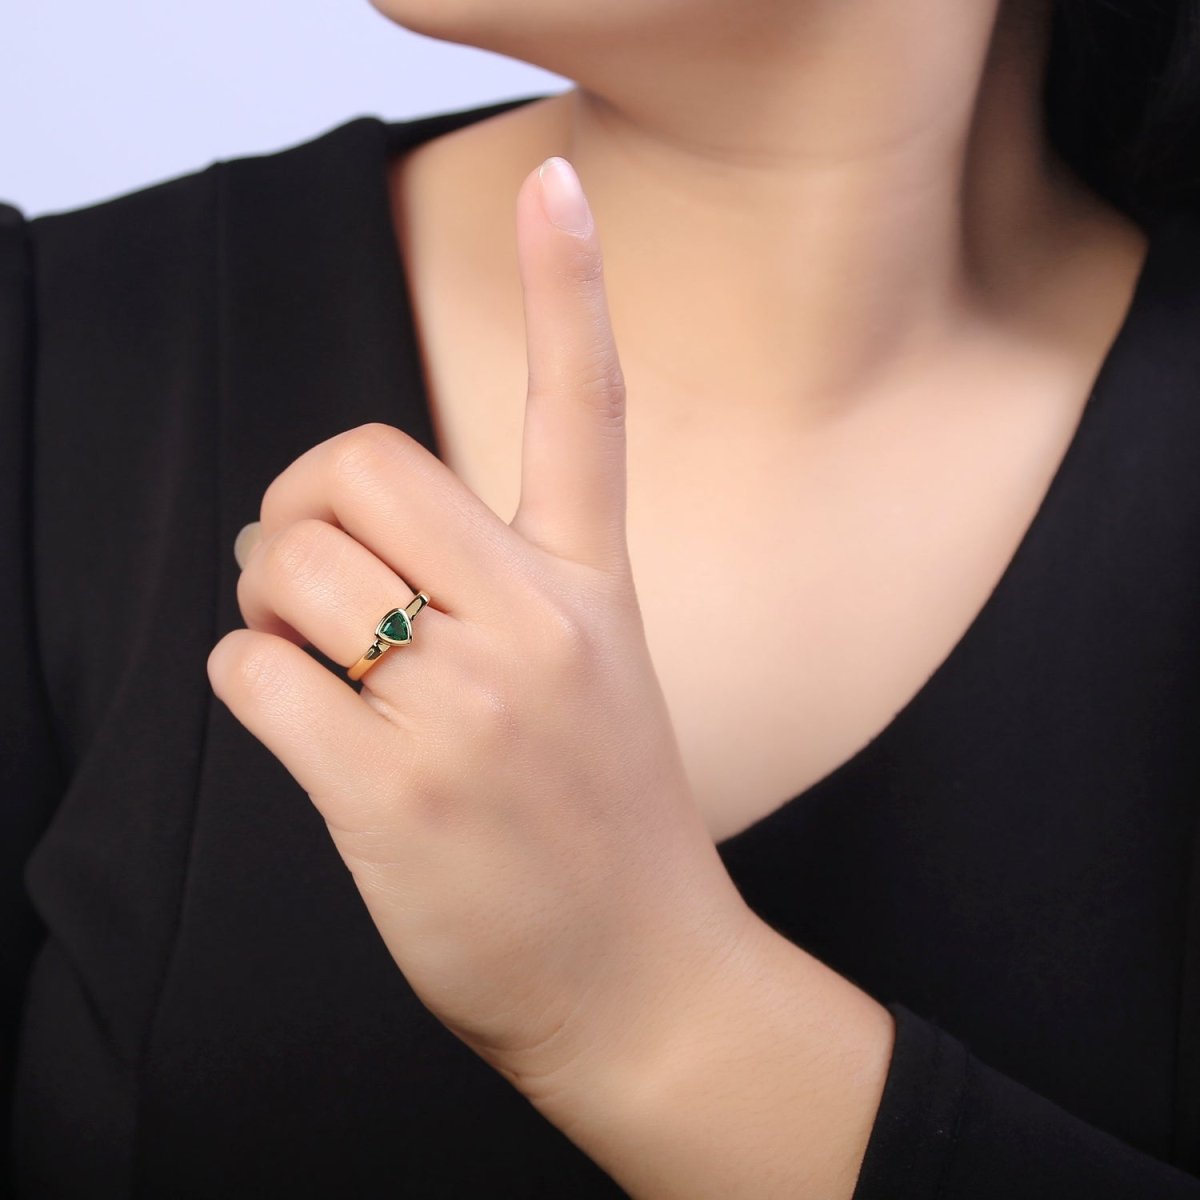 Gold Green CZ ring, Emerald ring, open ring, adjustable ring, green stone ring, dainty ring, stackable ring U-501 - DLUXCA